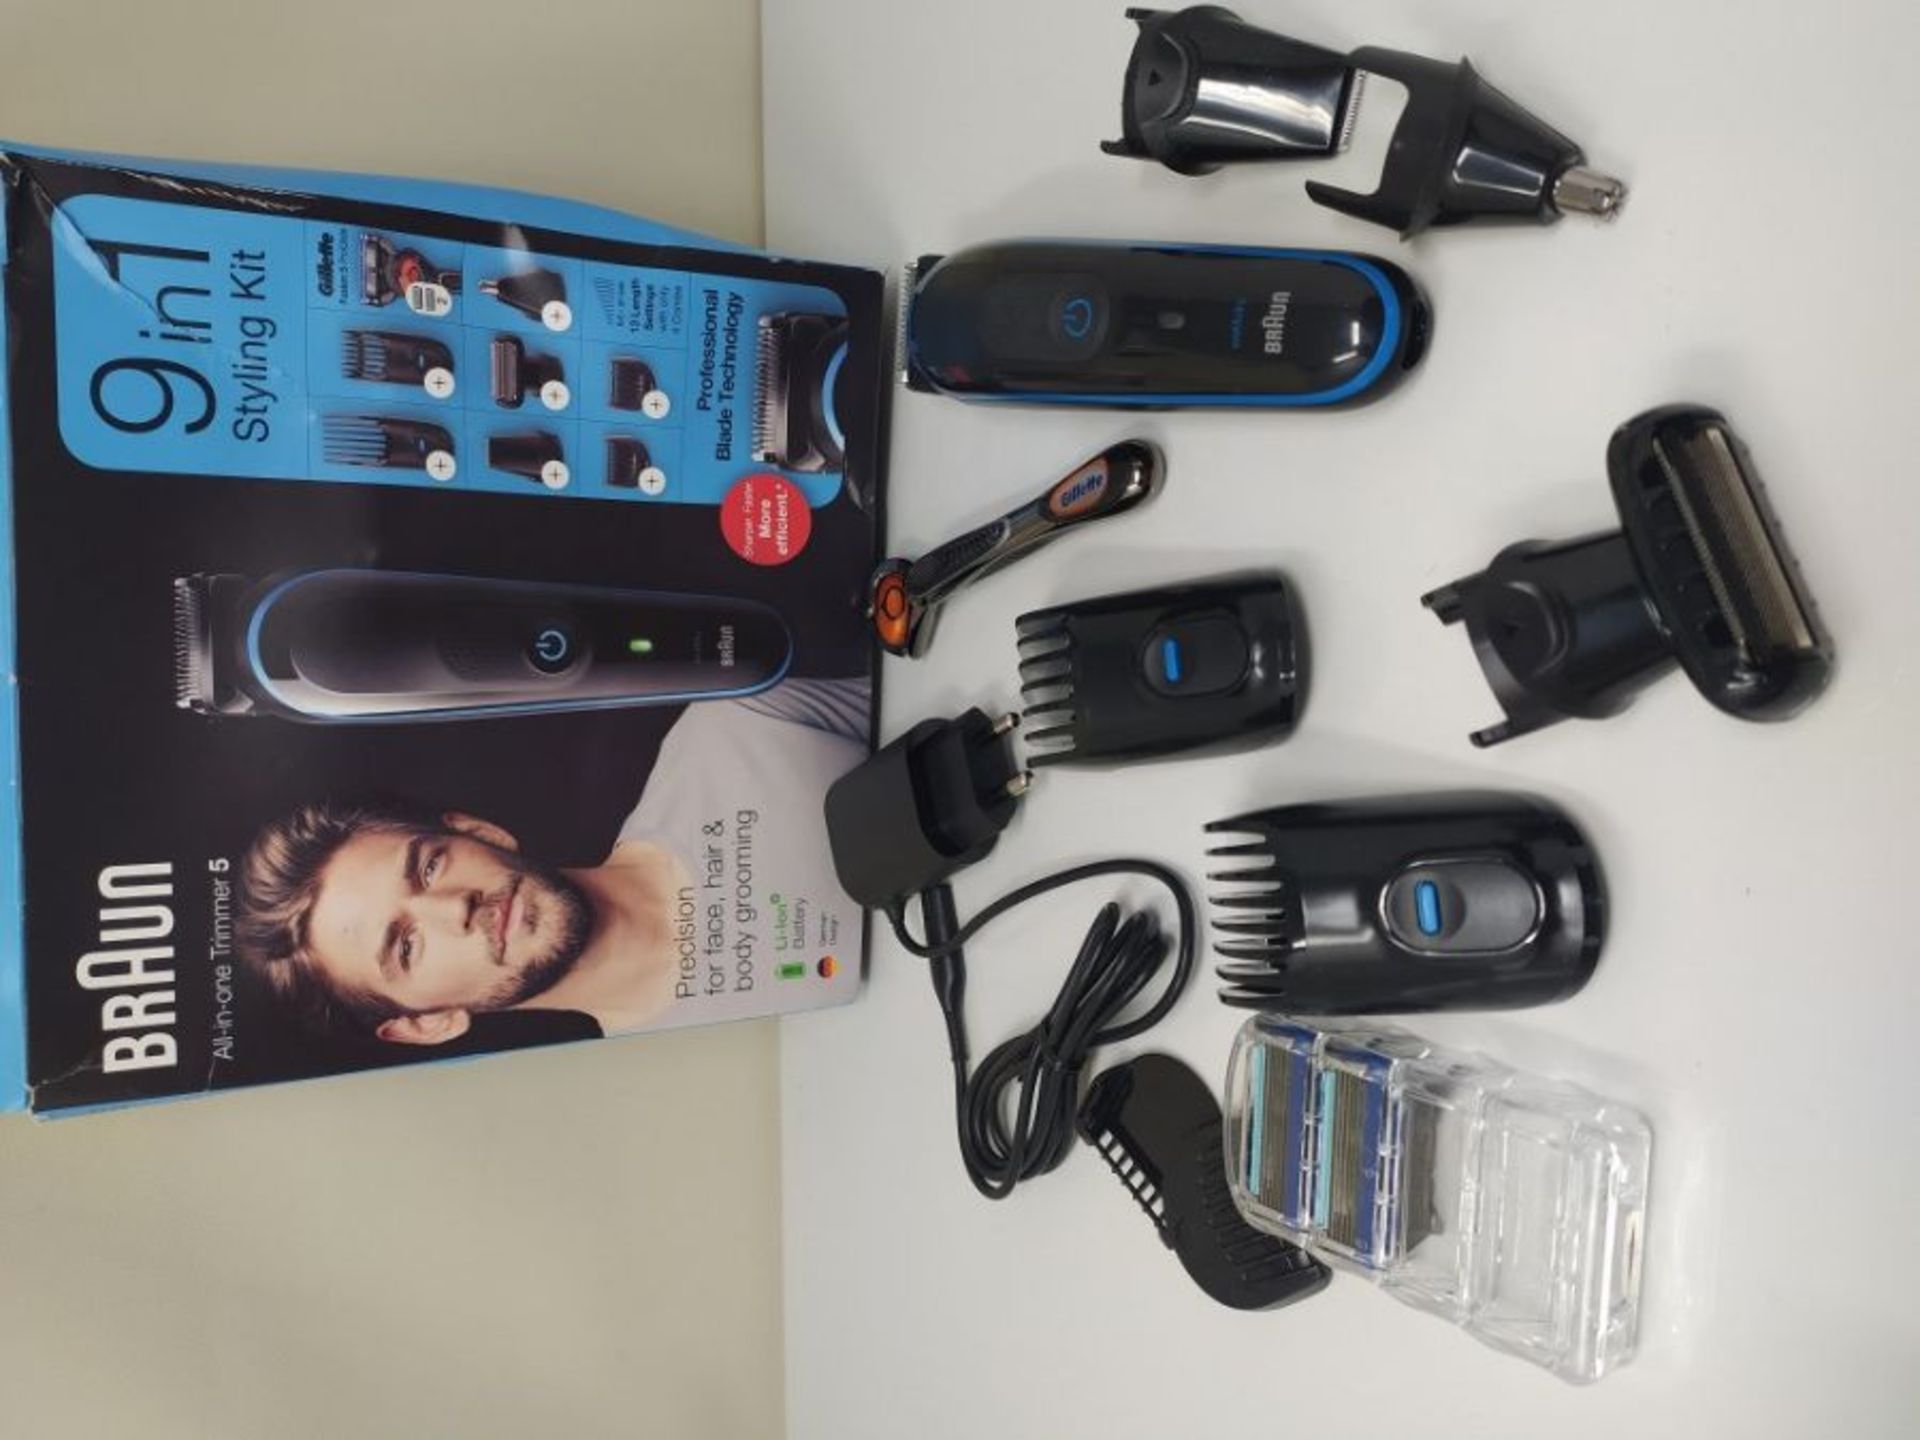 Braun 9-in-1 All-in-one Trimmer 5 MGK5280, Beard Trimmer for Men, Hair Clipper and Bod - Image 2 of 2